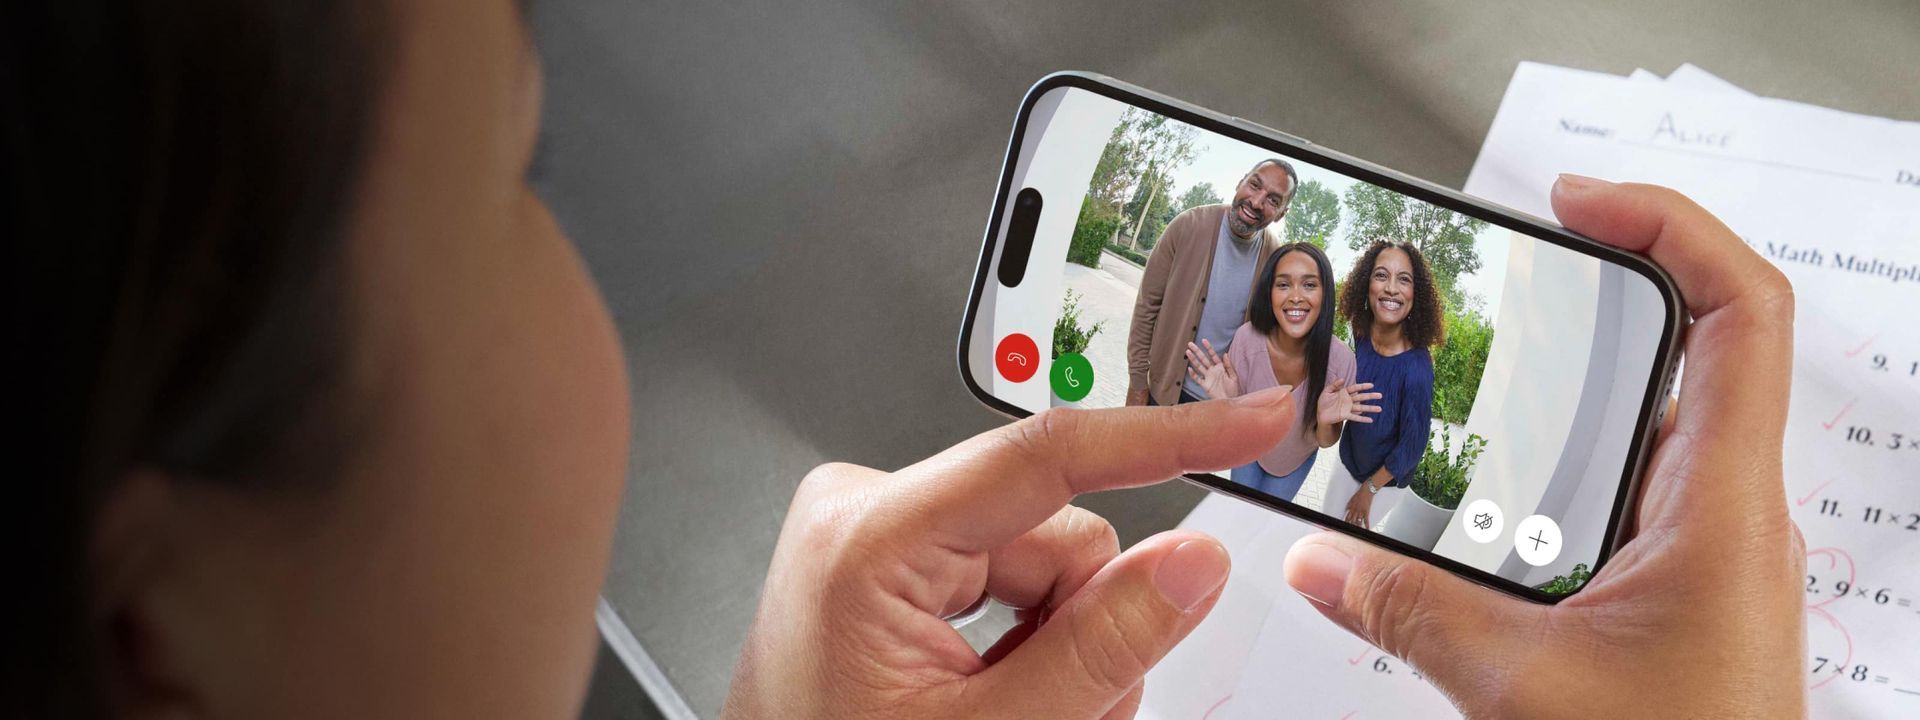 A person is taking a picture of a family on a cell phone.